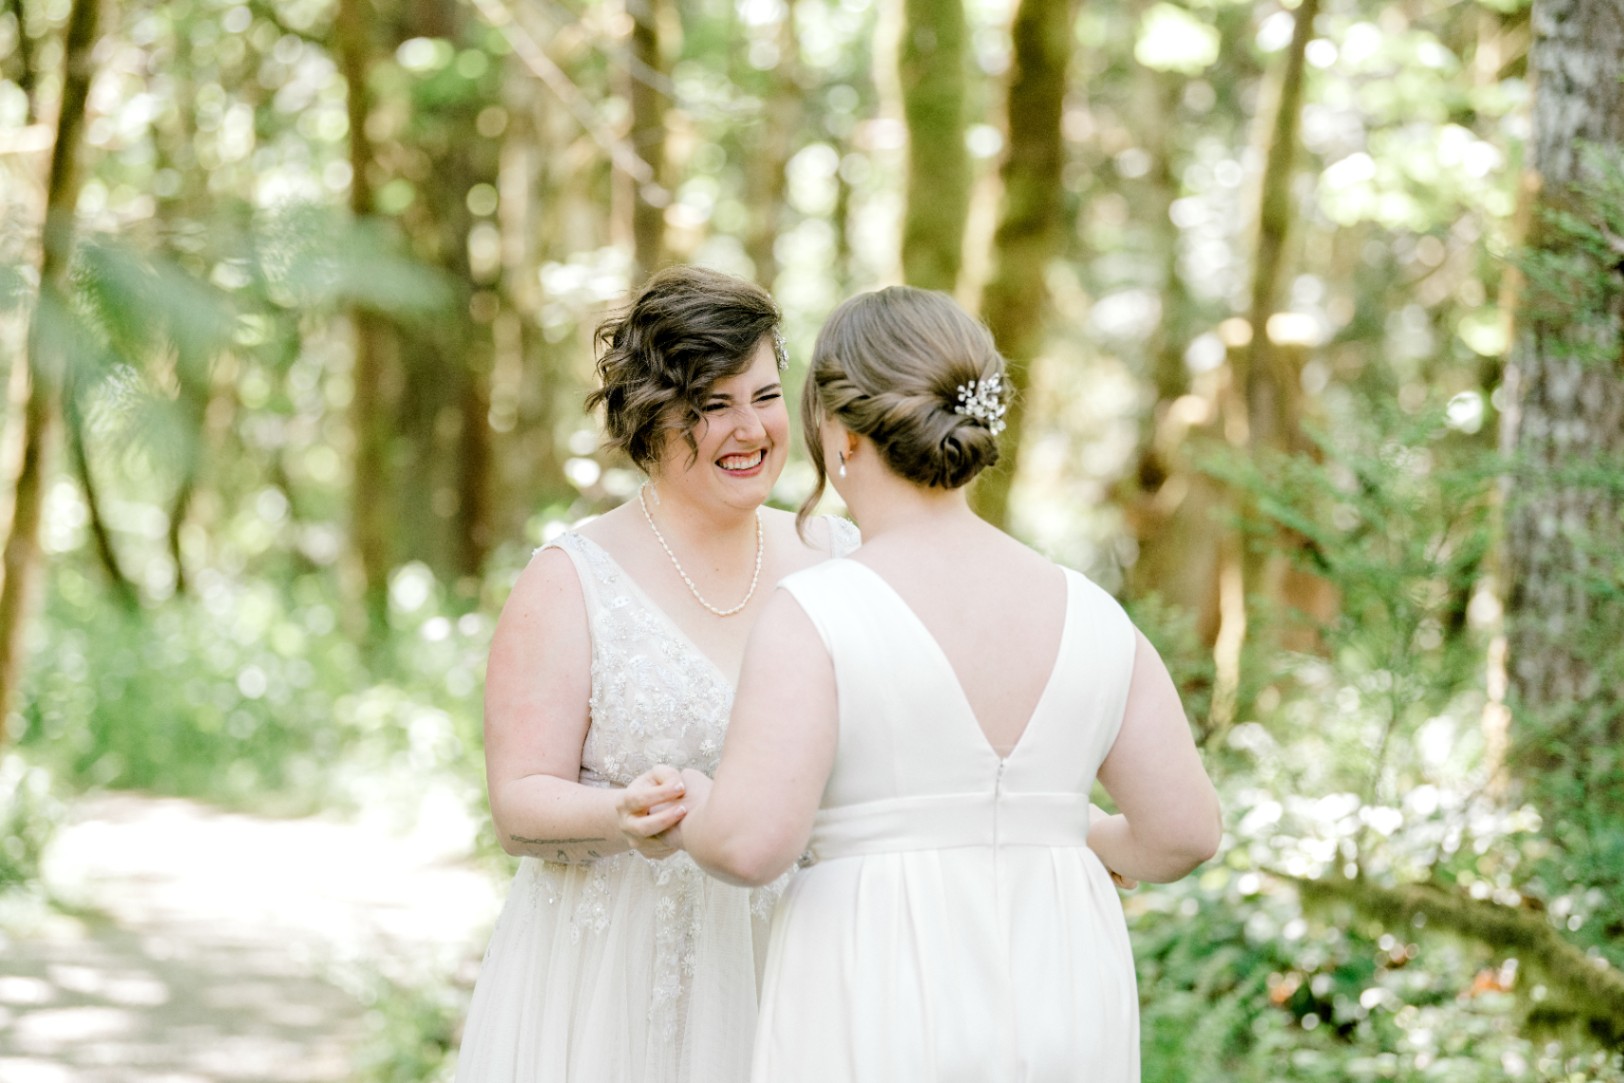 Two white lesbian brides in white wedding gowns with deep V-necks.